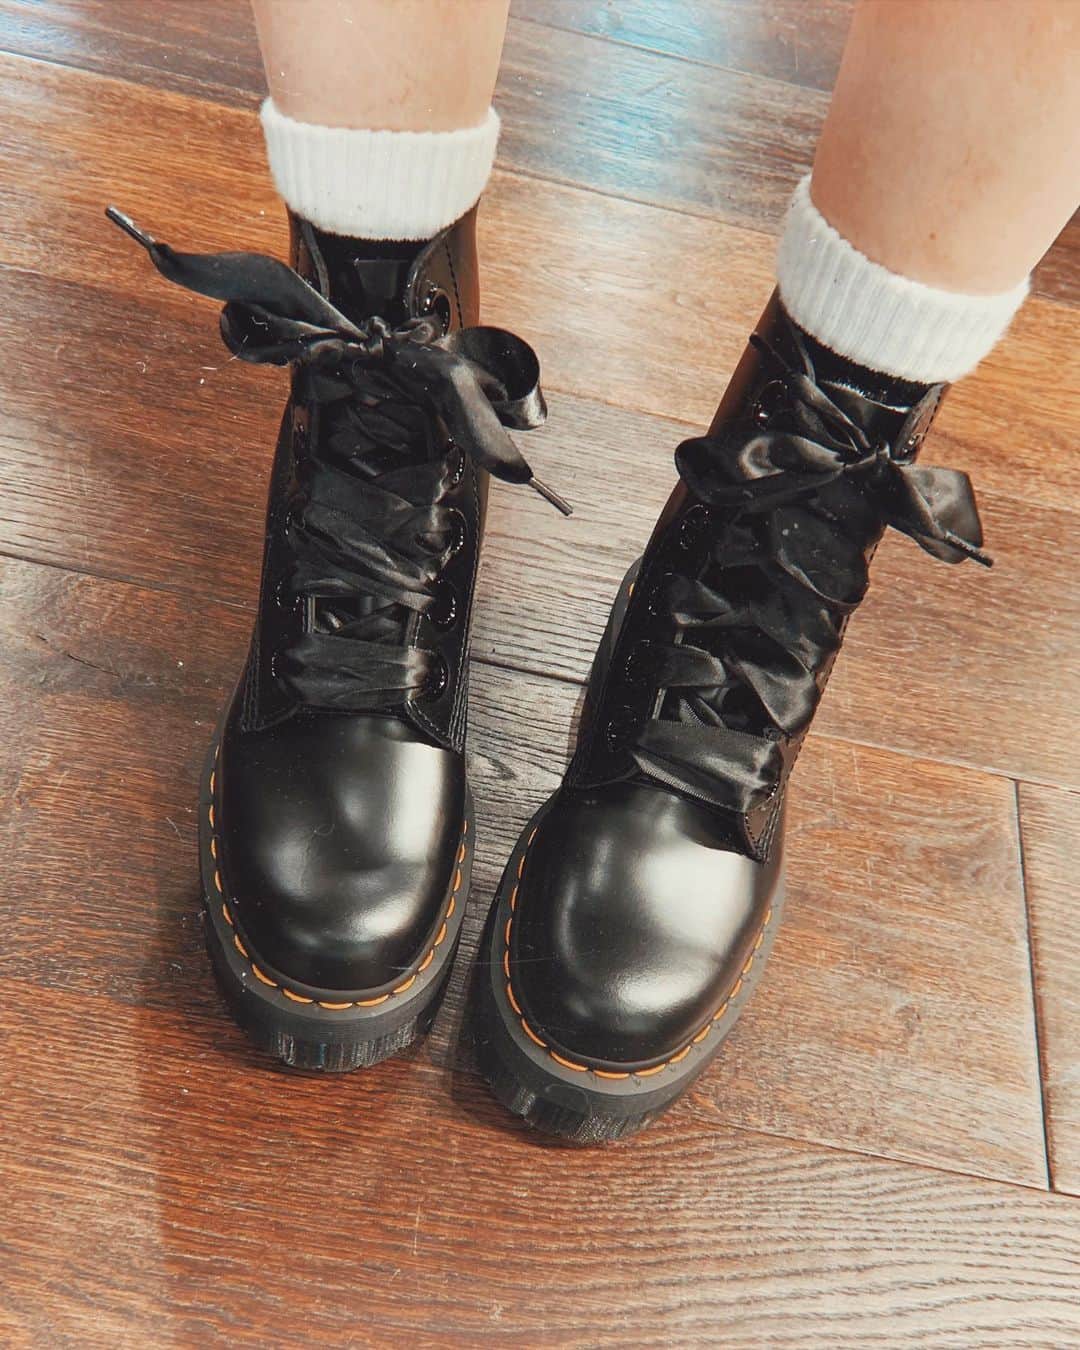 AikA♡ • 愛香 | JP Blogger • ブロガーのインスタグラム：「My new babes 🖤👢🎀😍 @drmartensofficial ﻿ Go to my stories for the lil shoe shopping at the store in DT ( and me being so happy with these new babes at a dumpling restaurant 😝 ) and unboxing 📦✨﻿ ﻿ ⋆ ⋆ ⋆ ⋆ ﻿ ﻿ 初ドクターマーチン🖤﻿ サテンレースがめっちゃ可愛すぎるぅ👢😍﻿ ストーリーズに買い物＆開封動画載せたよぉー！！﻿ -﻿ #drmartens #socute #newboots #blackboots #ootd #shoefie #petitefashion #ドクターマーチン」